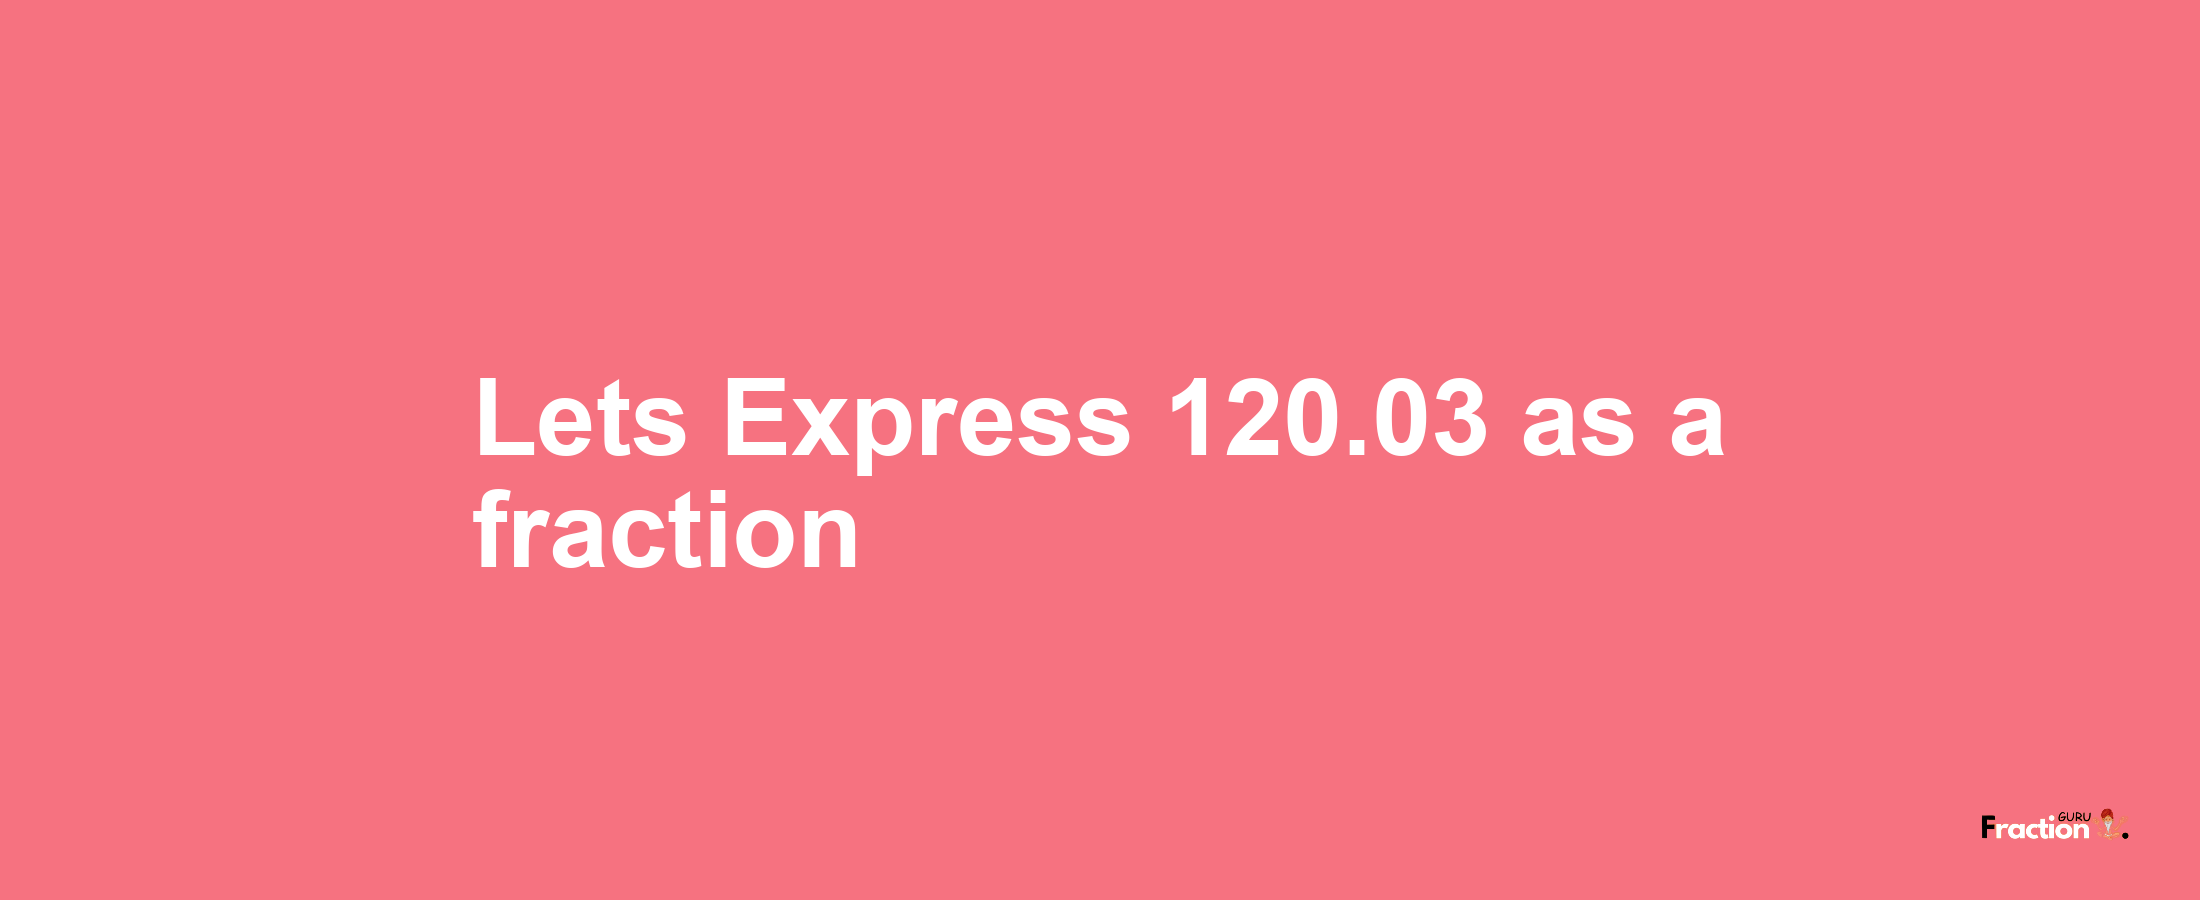 Lets Express 120.03 as afraction